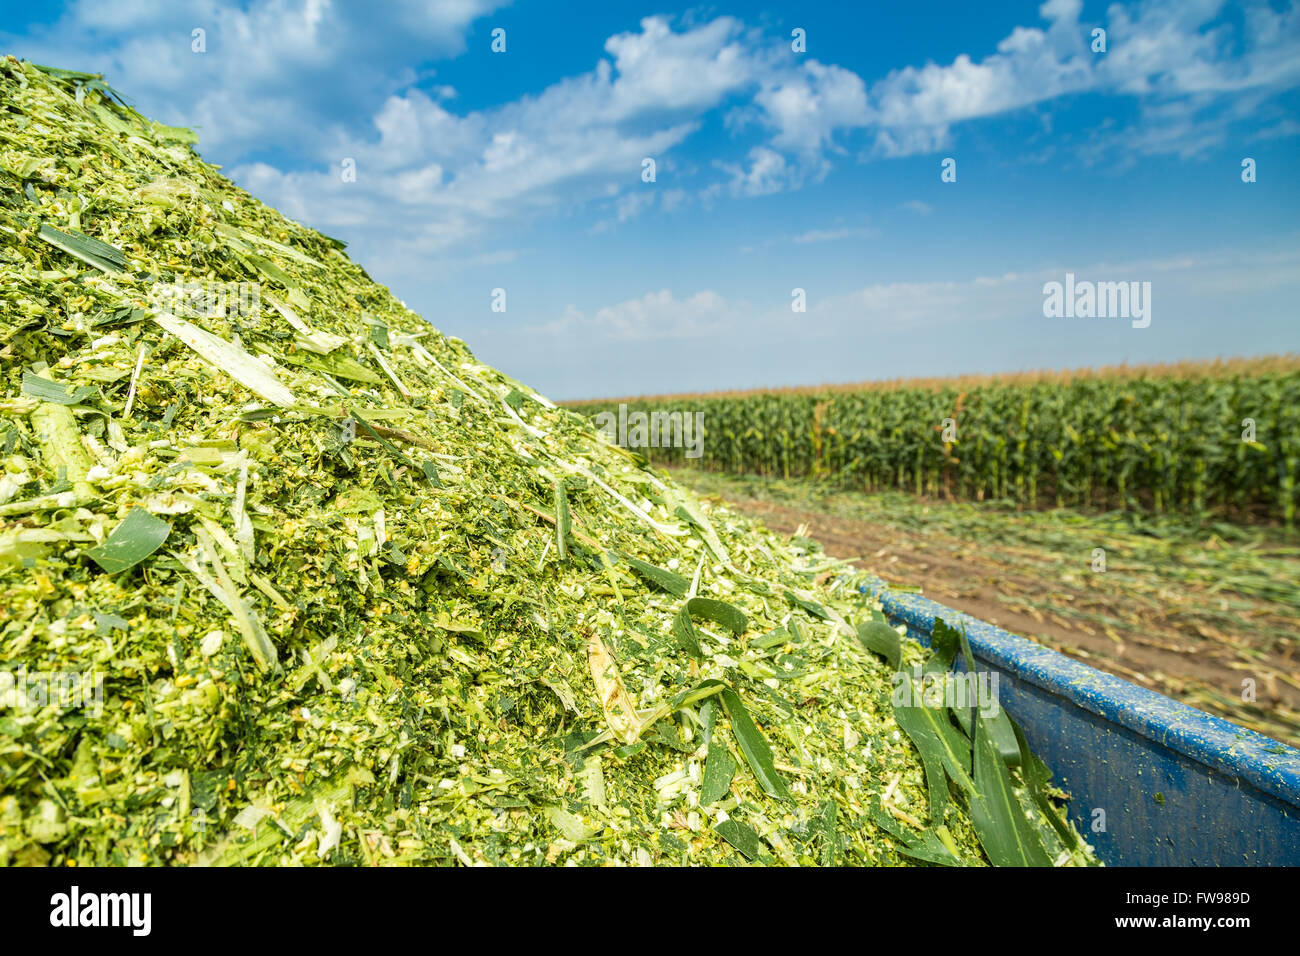 Silage orn maize green stems unripe on field Stock Photo